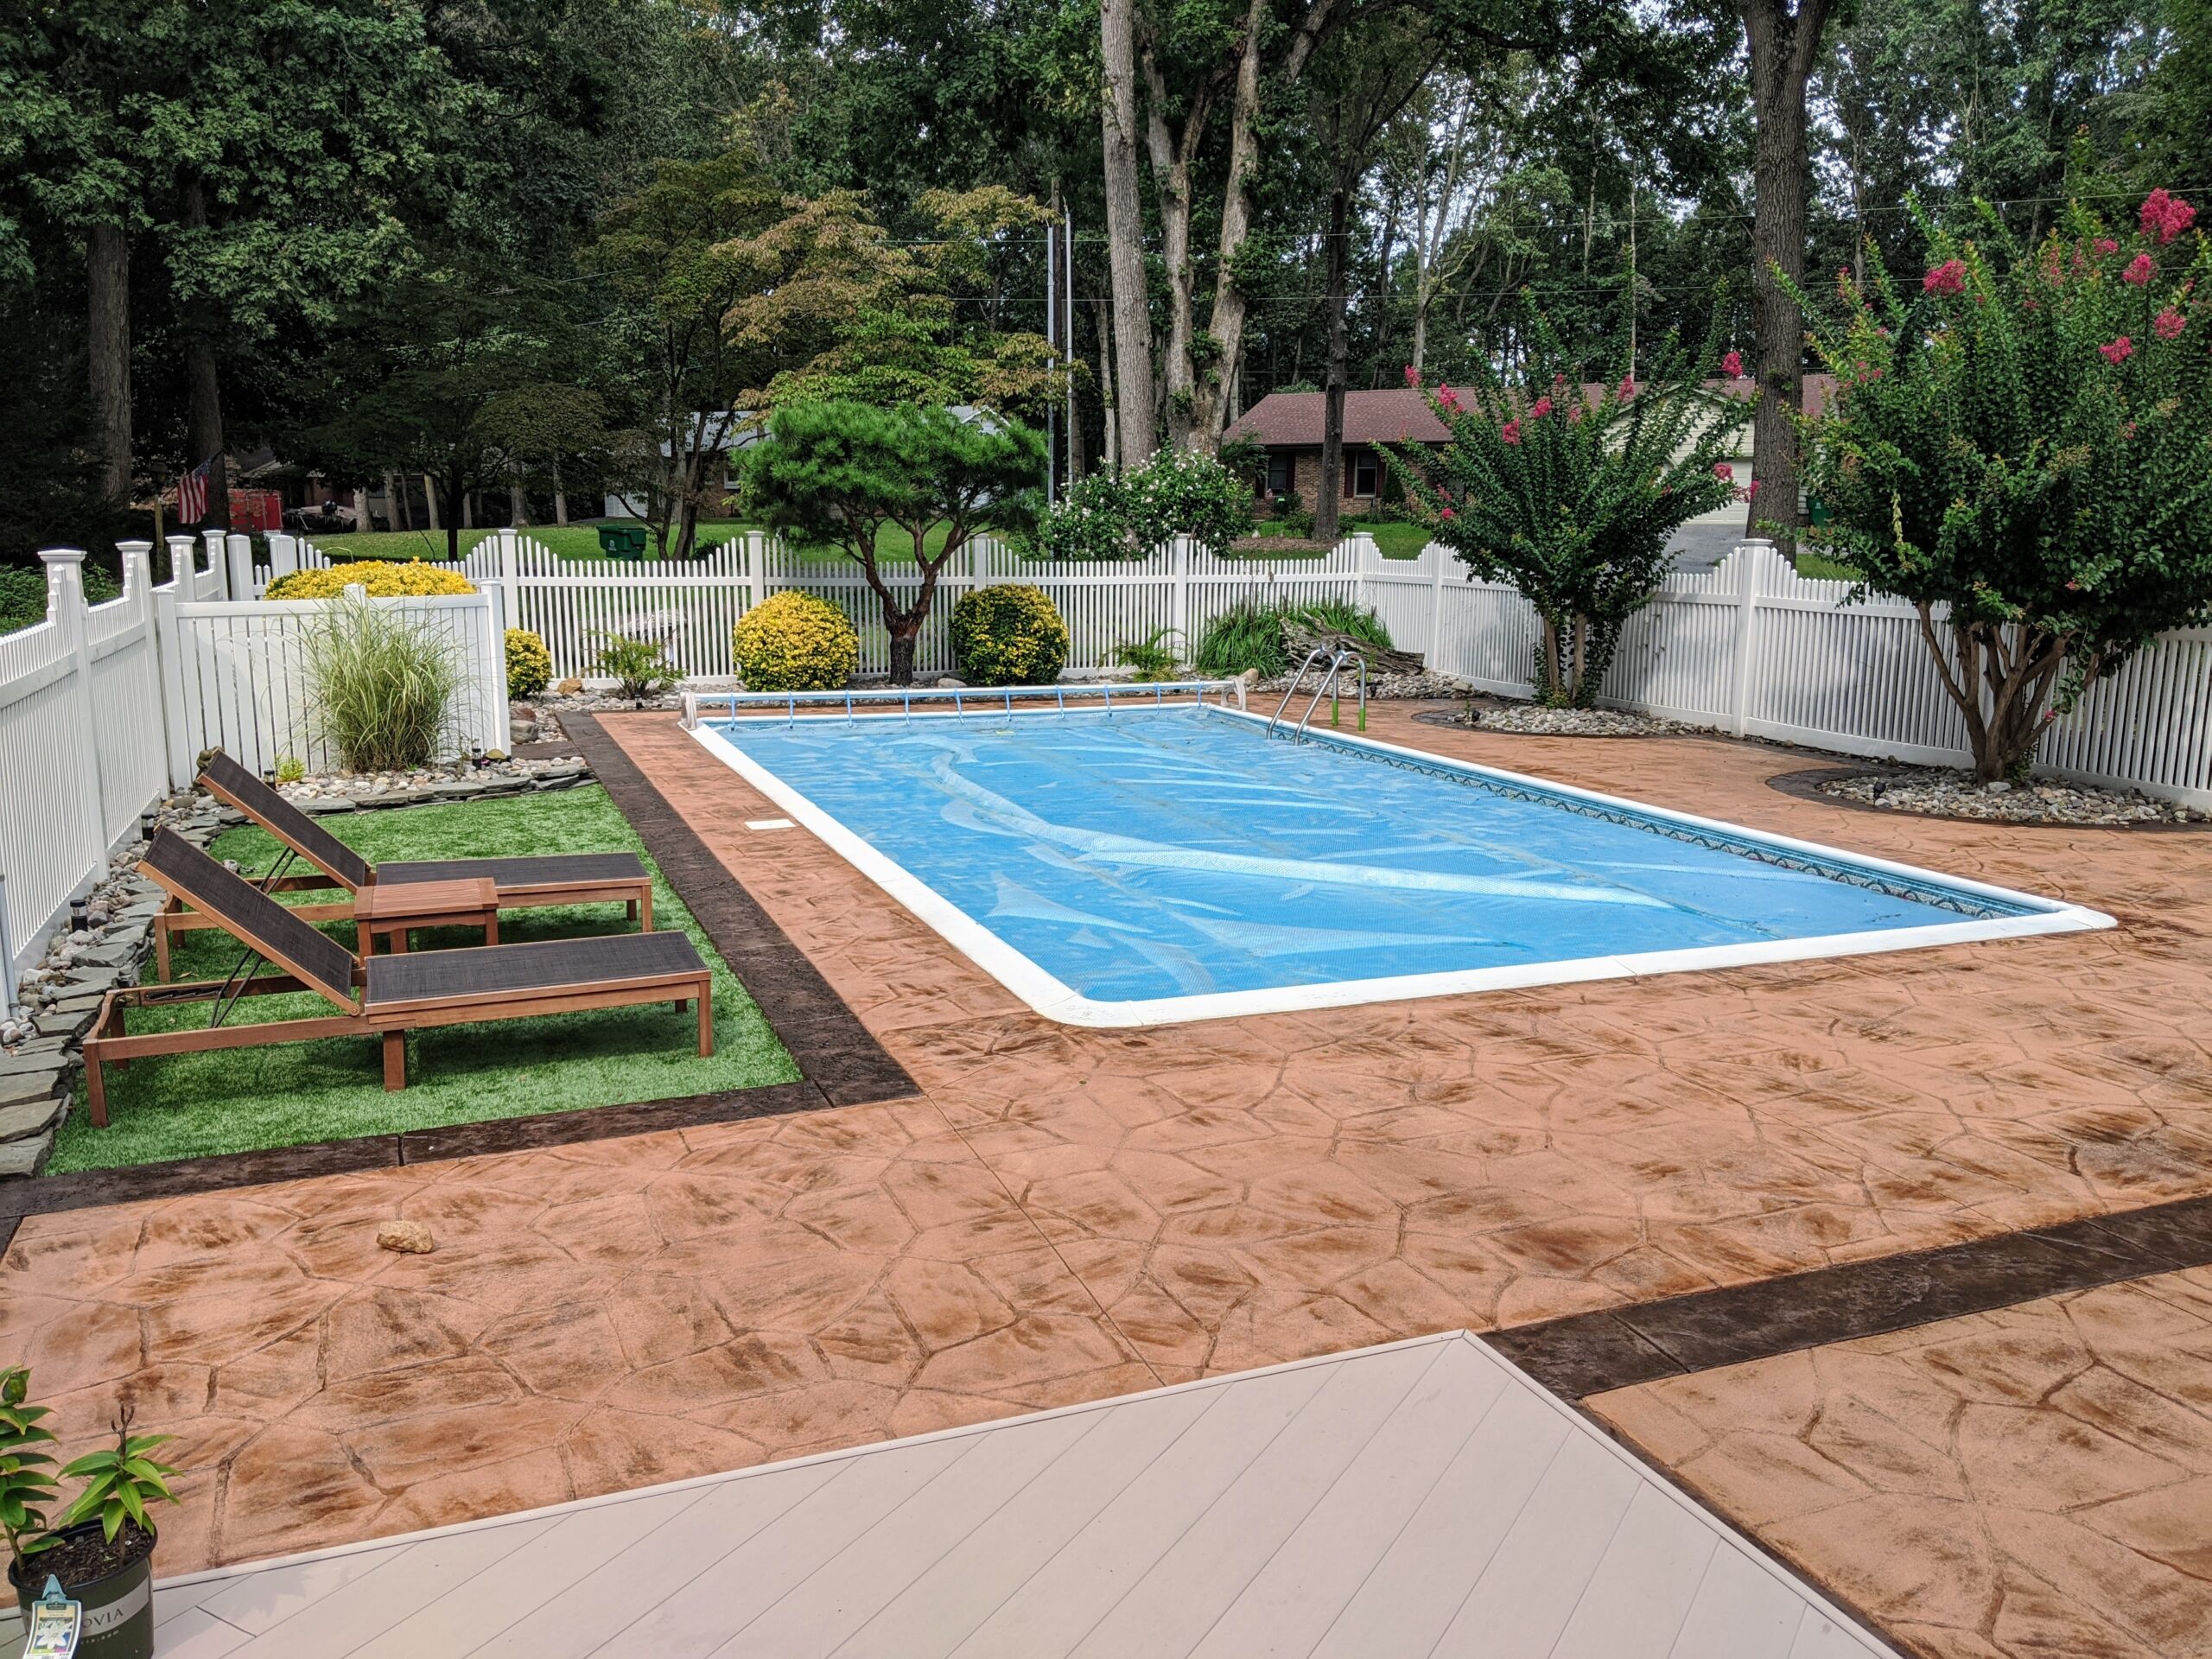 Revitalized faded stamped concrete pool deck with Cumin and Driftwood landscape edging